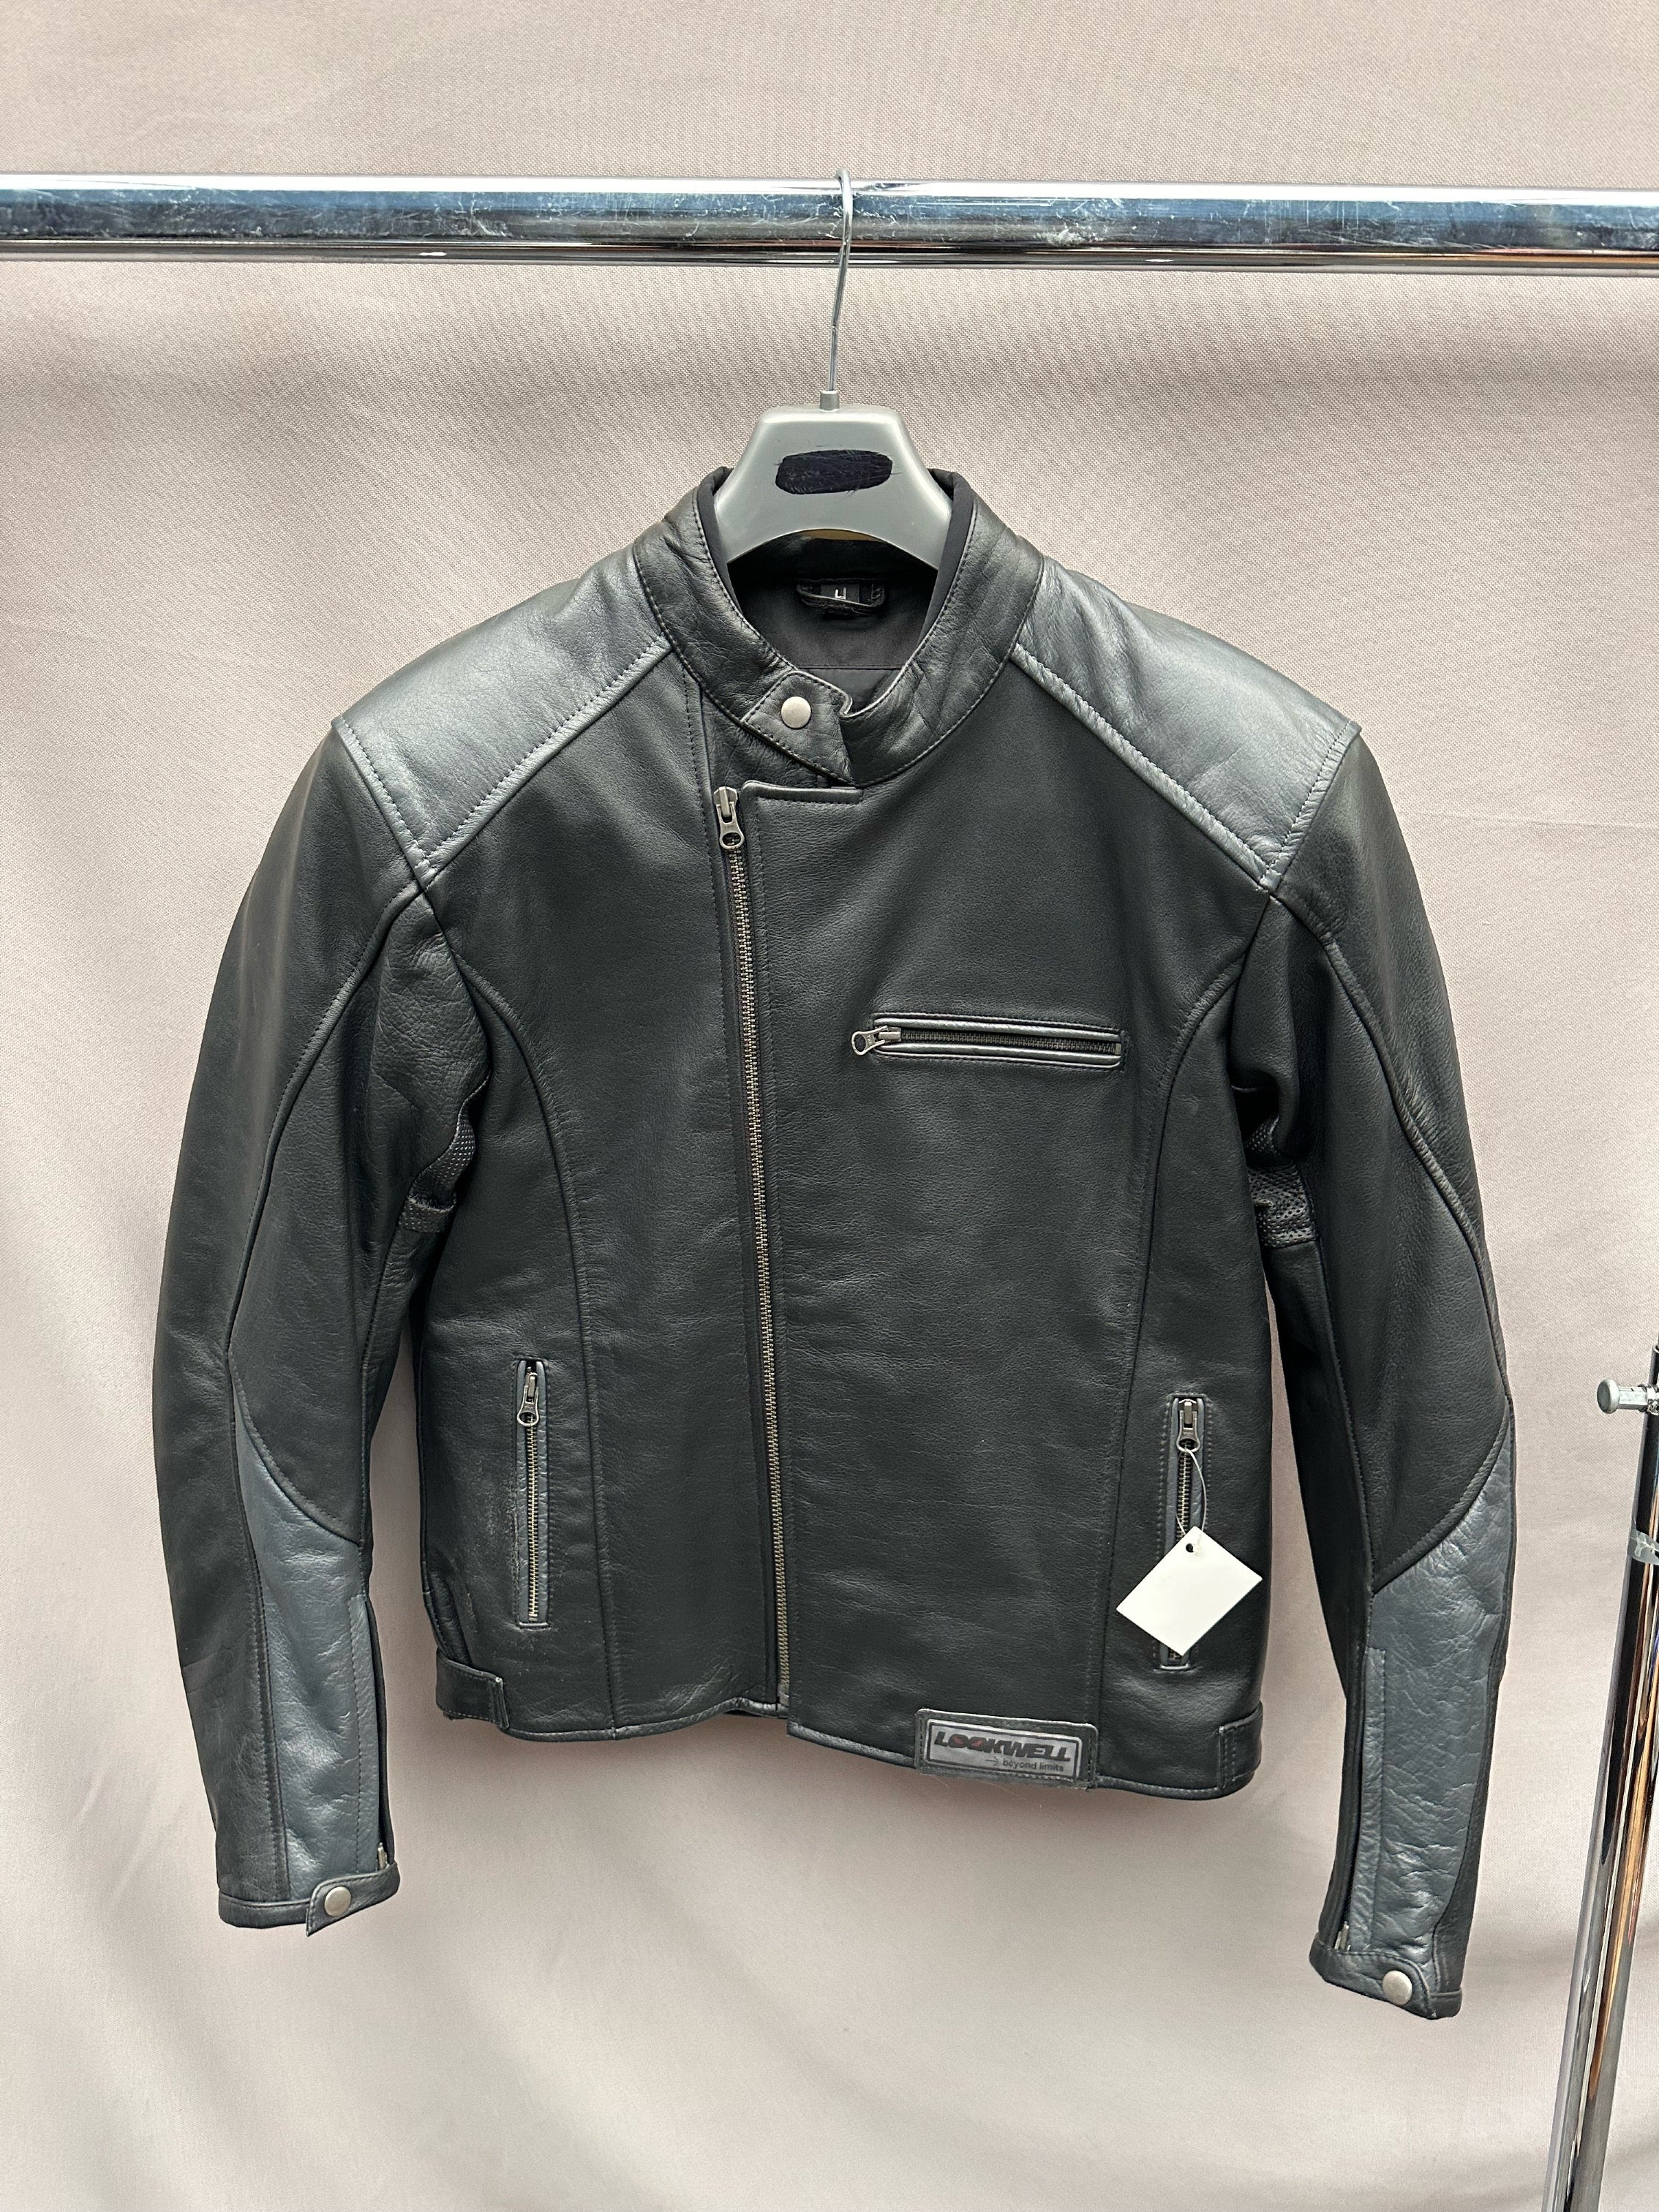 Lookwell Leather Motor Jacket [L]